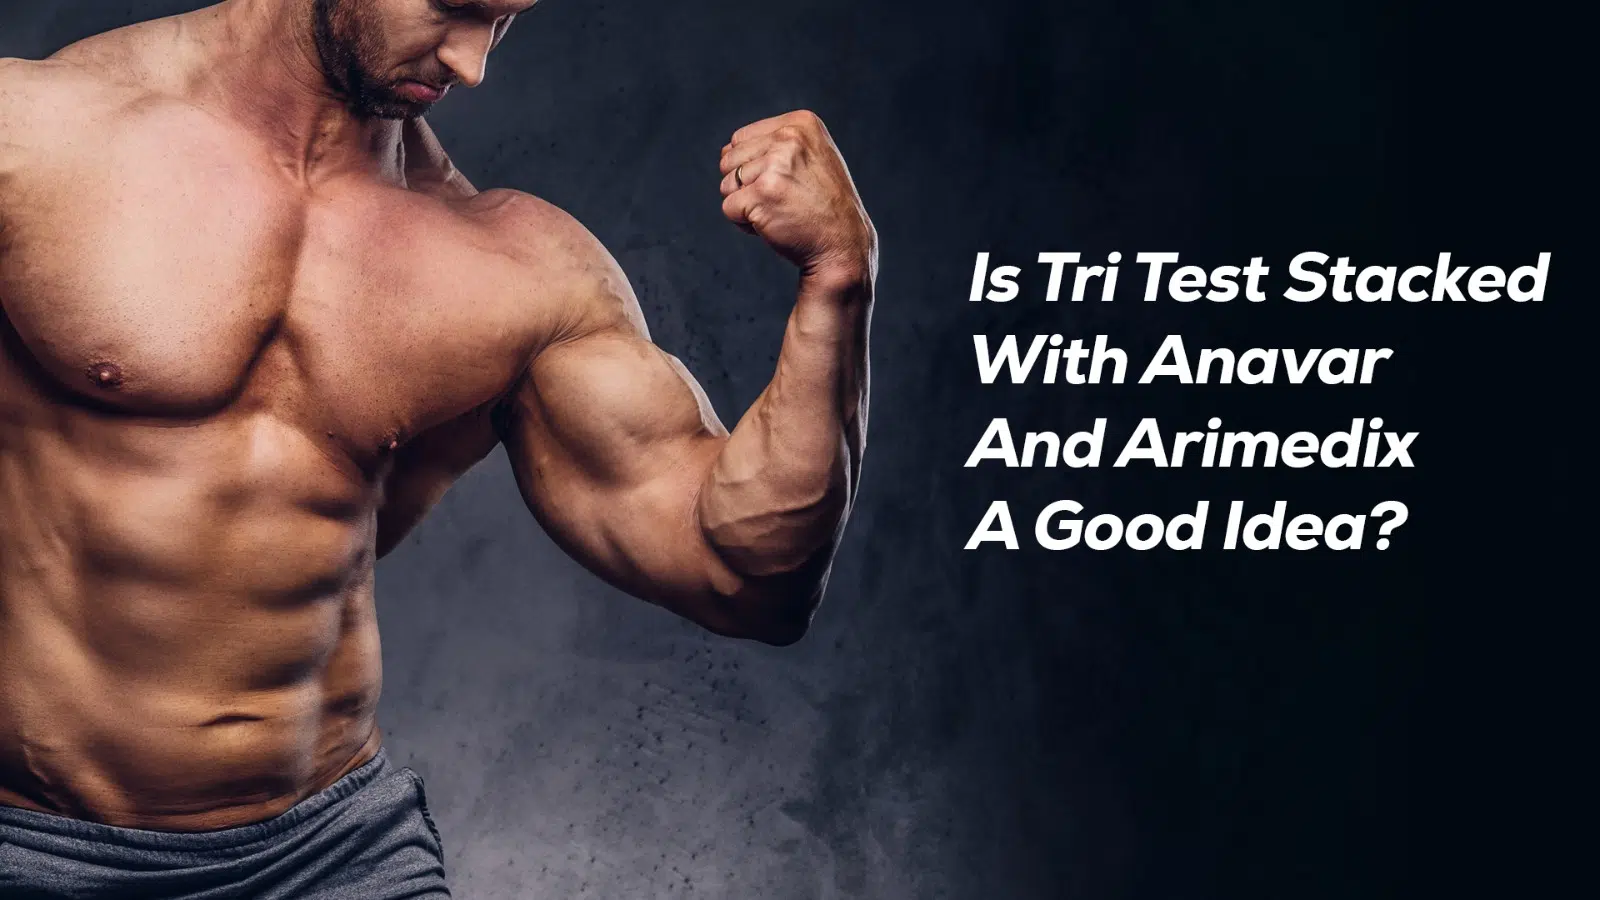 A Comprehensive Analysis of the Use of Tri Test, Anavar, and Arimidex in Bodybuilding